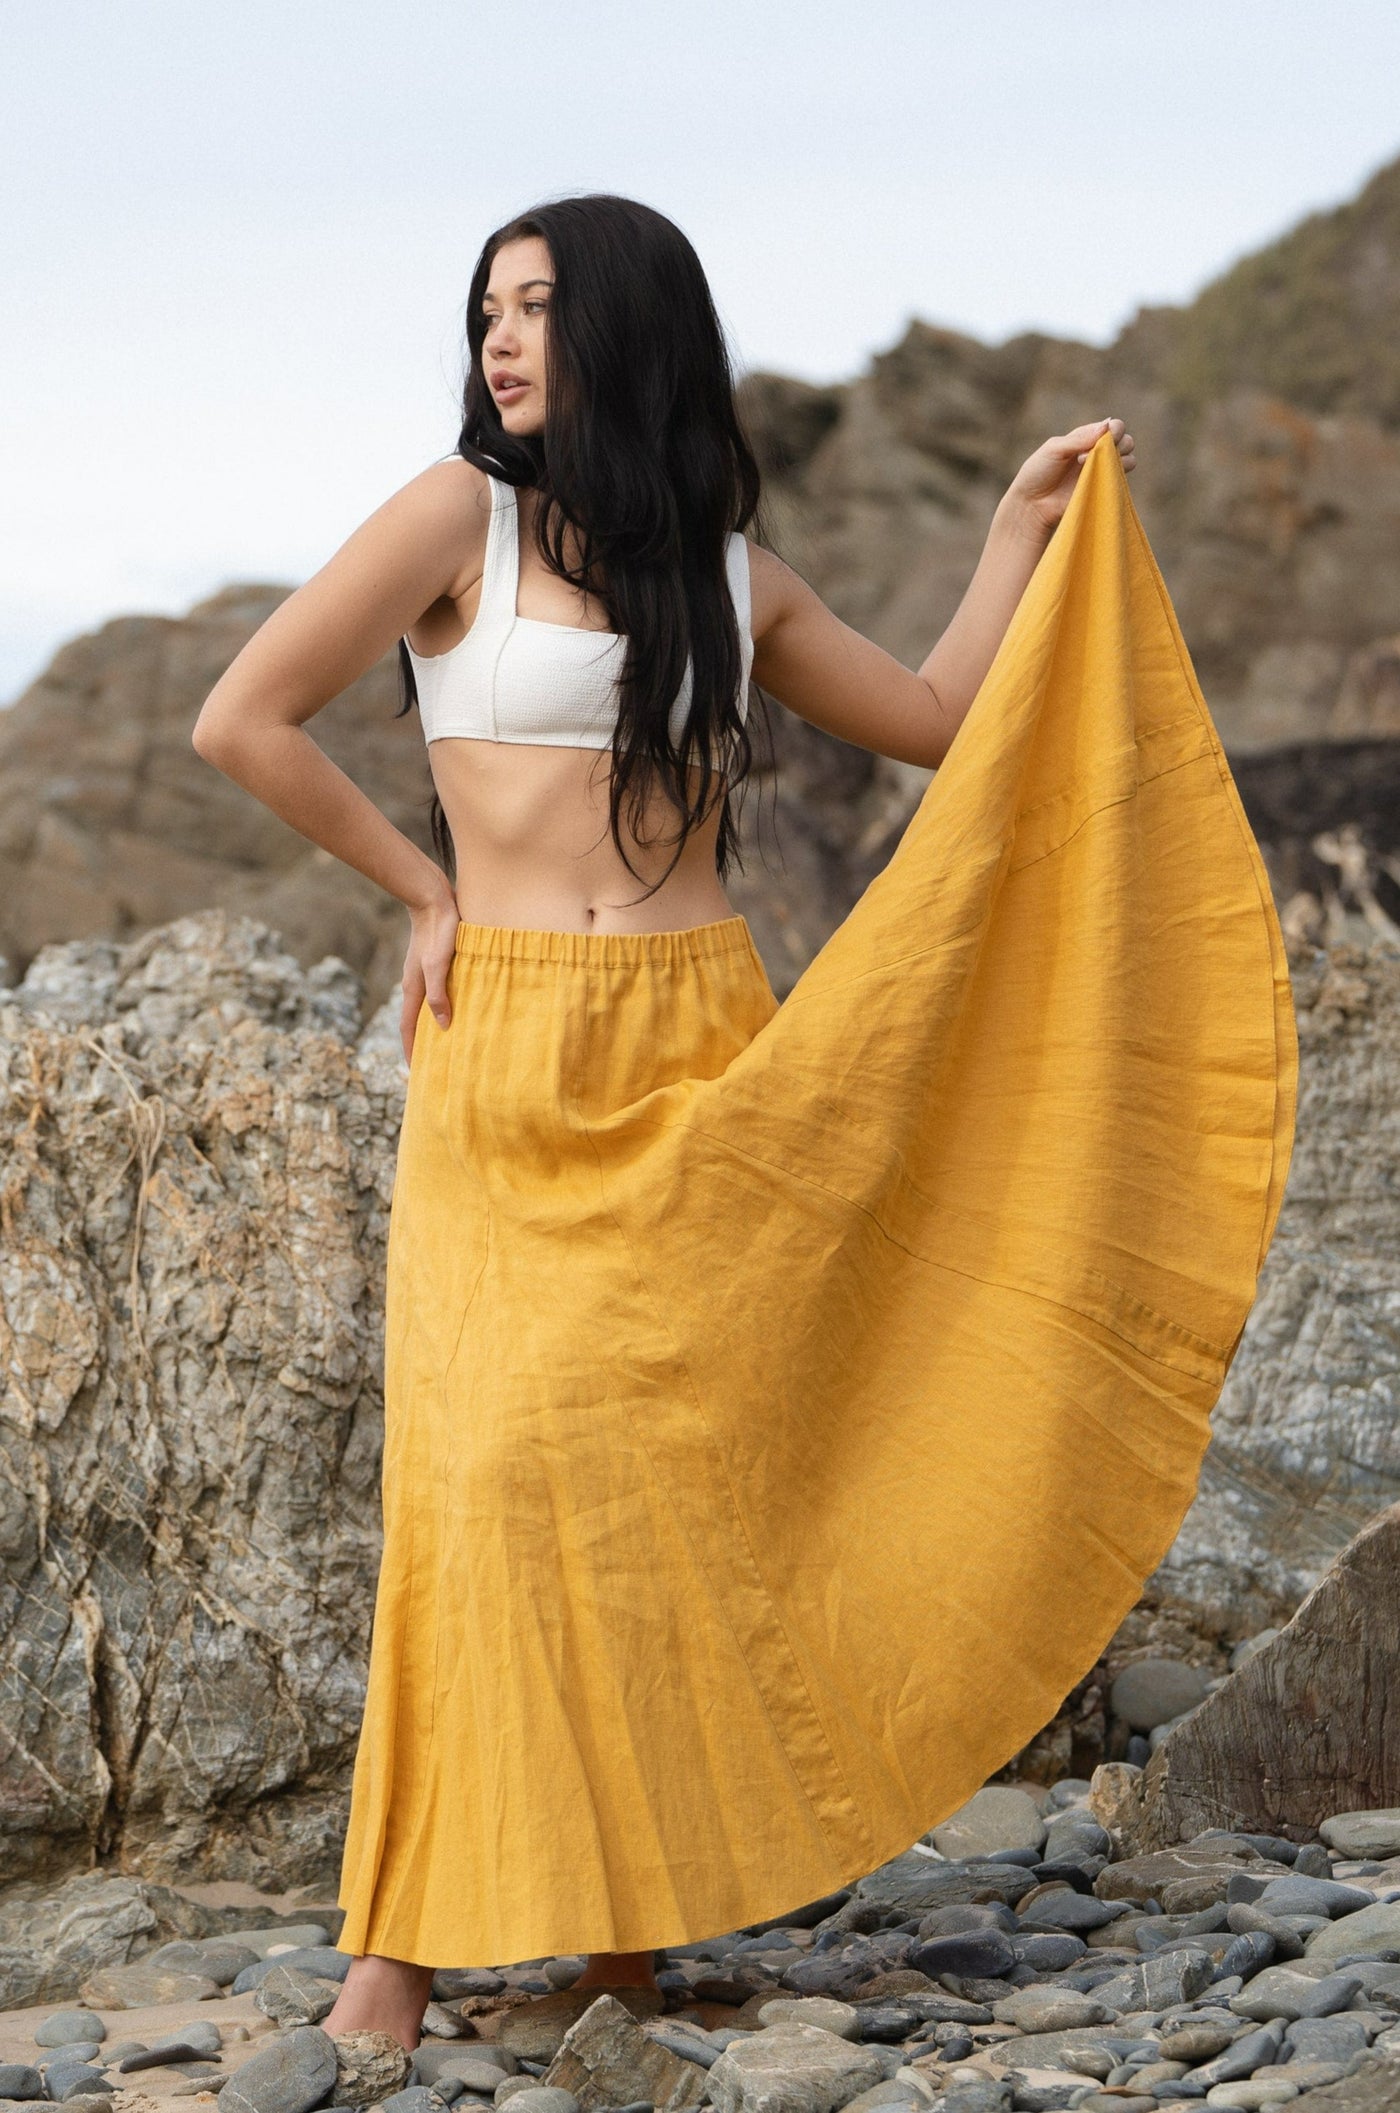 Lilly Pilly Collection 100% organic linen Stella Skirt in Sunflower